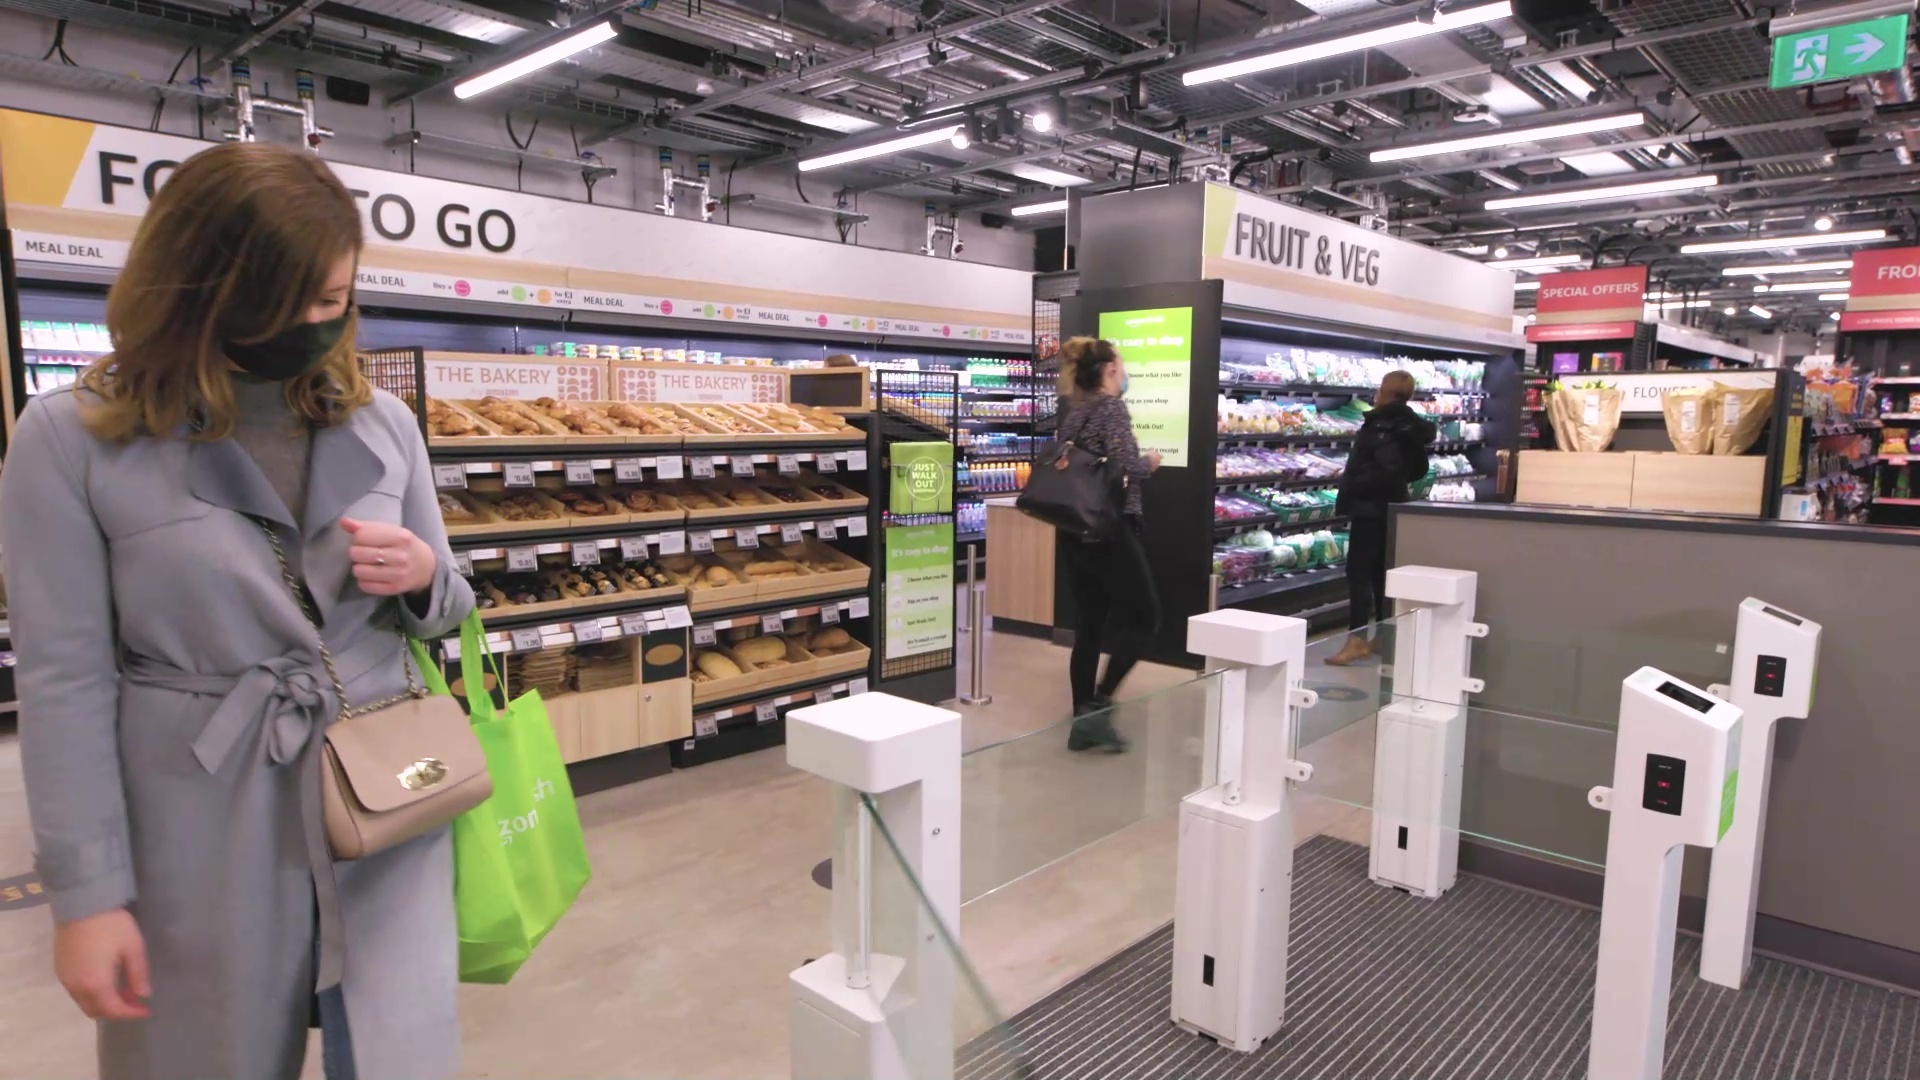  Amazon  UK s first checkout free Fresh grocery store opens 